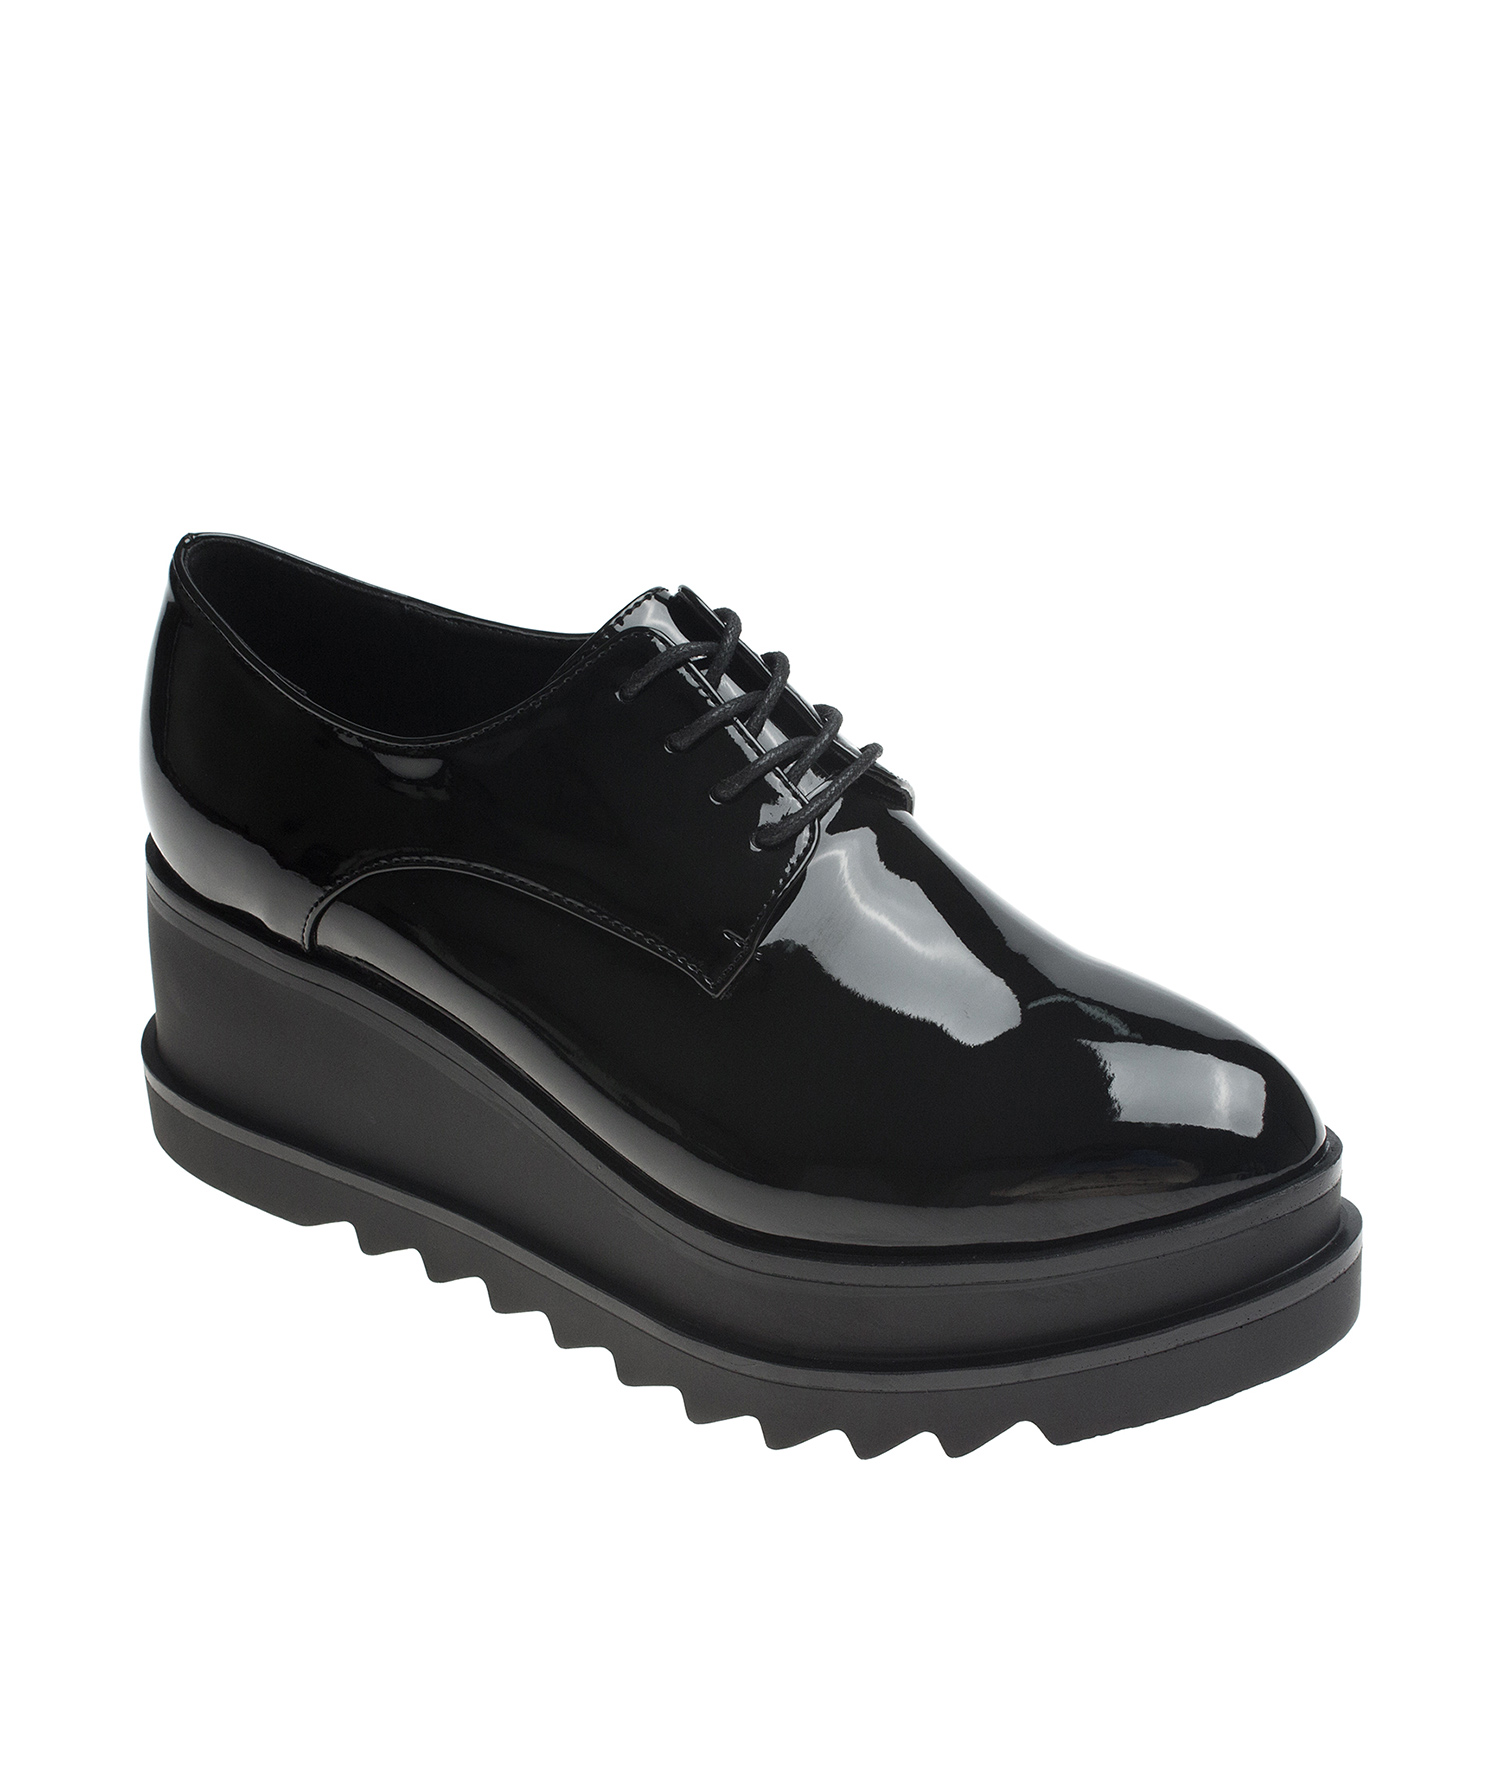 Heel Platform Shoes Lace Up Patent Leather Creepers Oxford Women Wedge High 